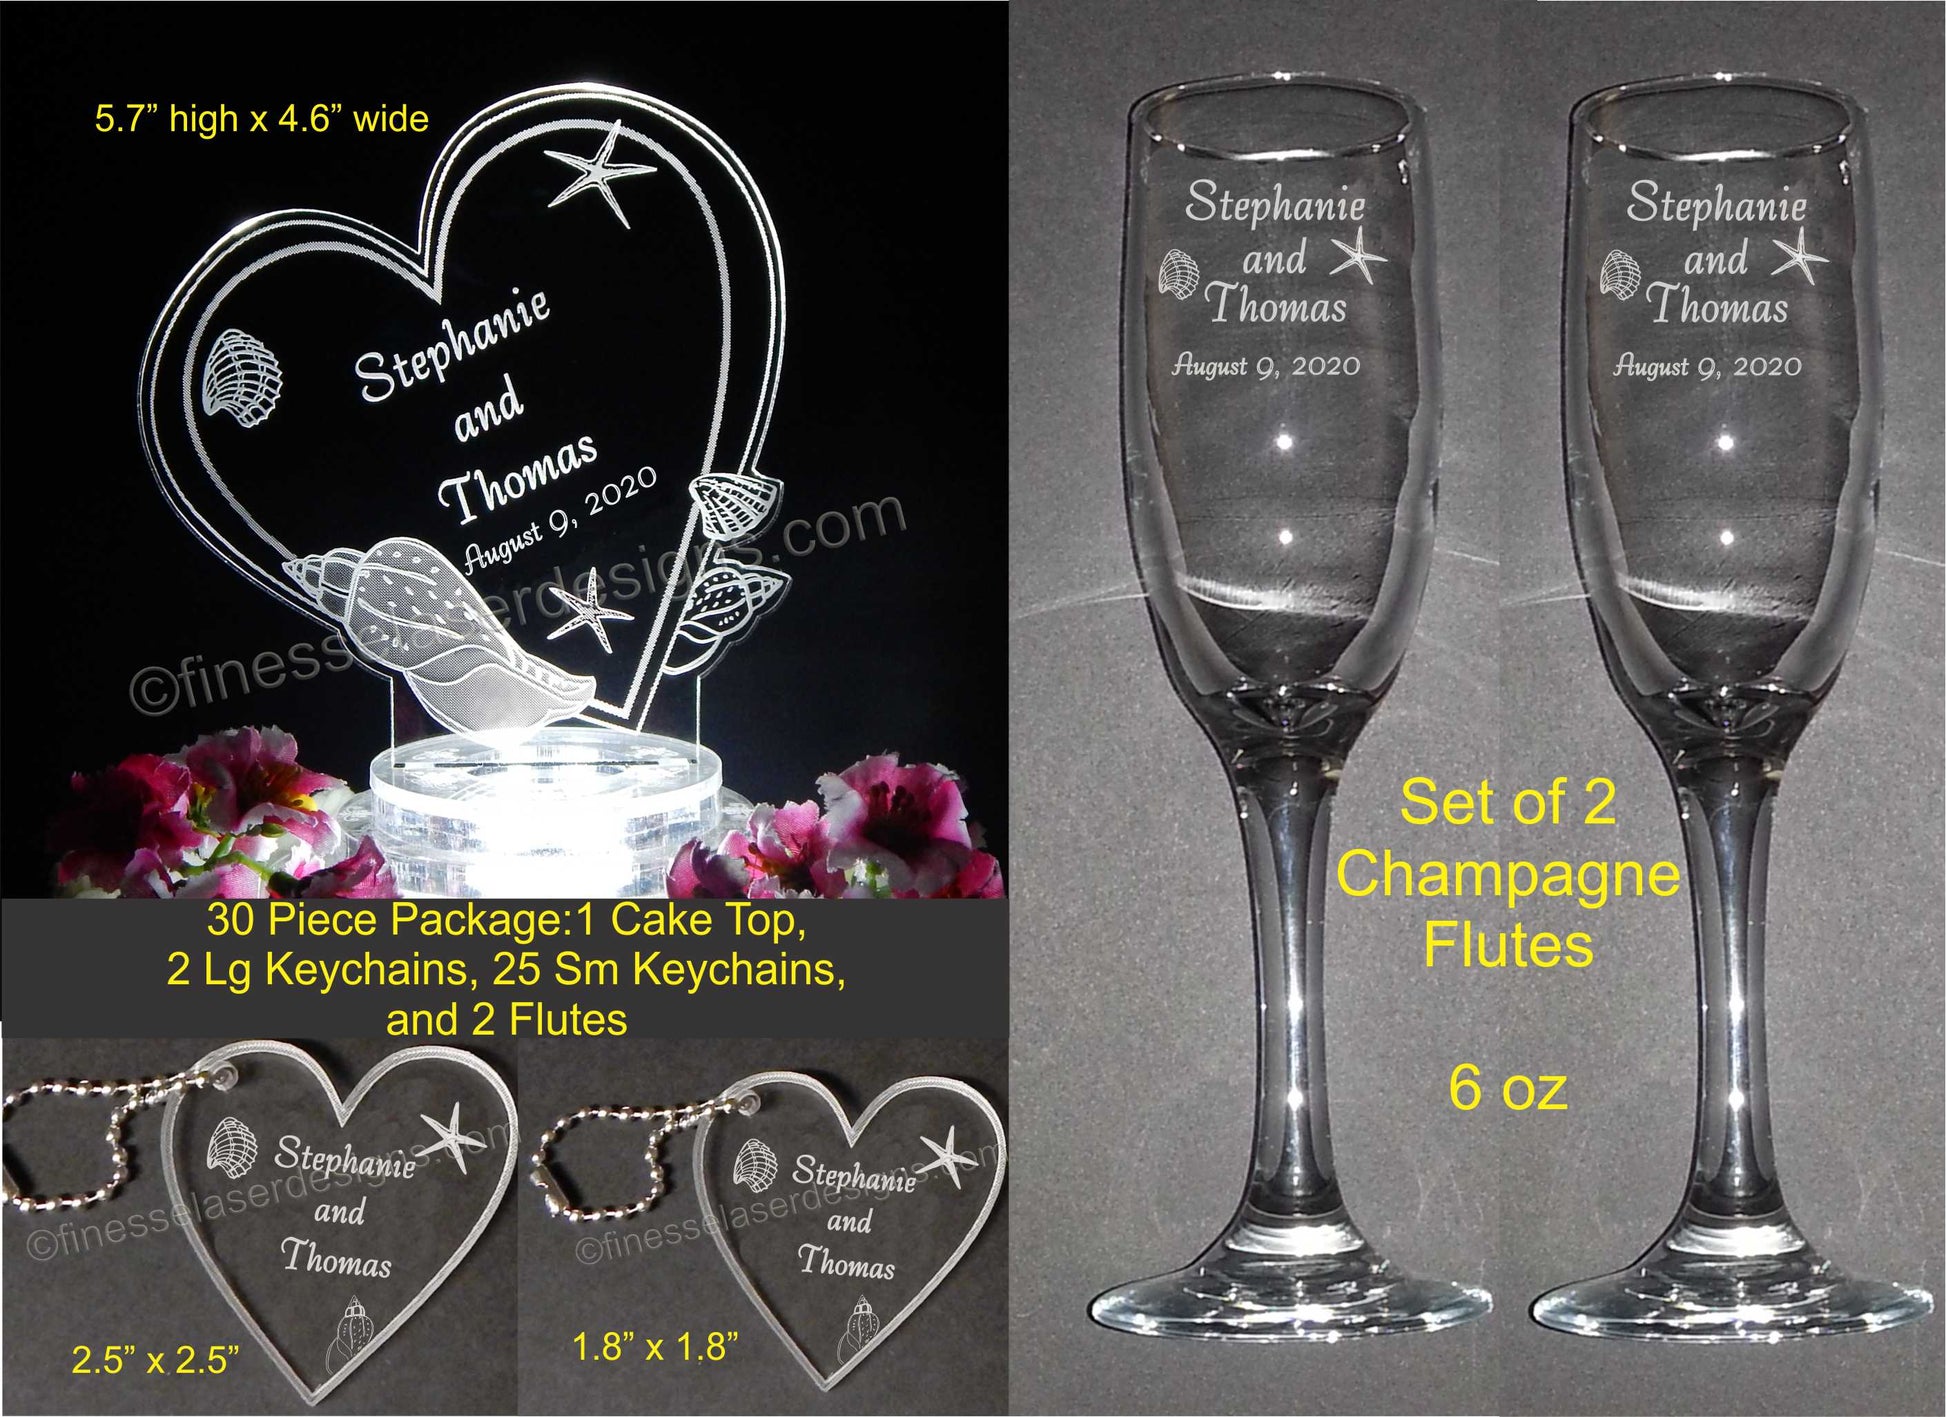 photo showing wedding package with an acrylic heart shaped seashell decorated cake topper, two sizes of acrylic keychain favors and a set of 2 champagne flutes